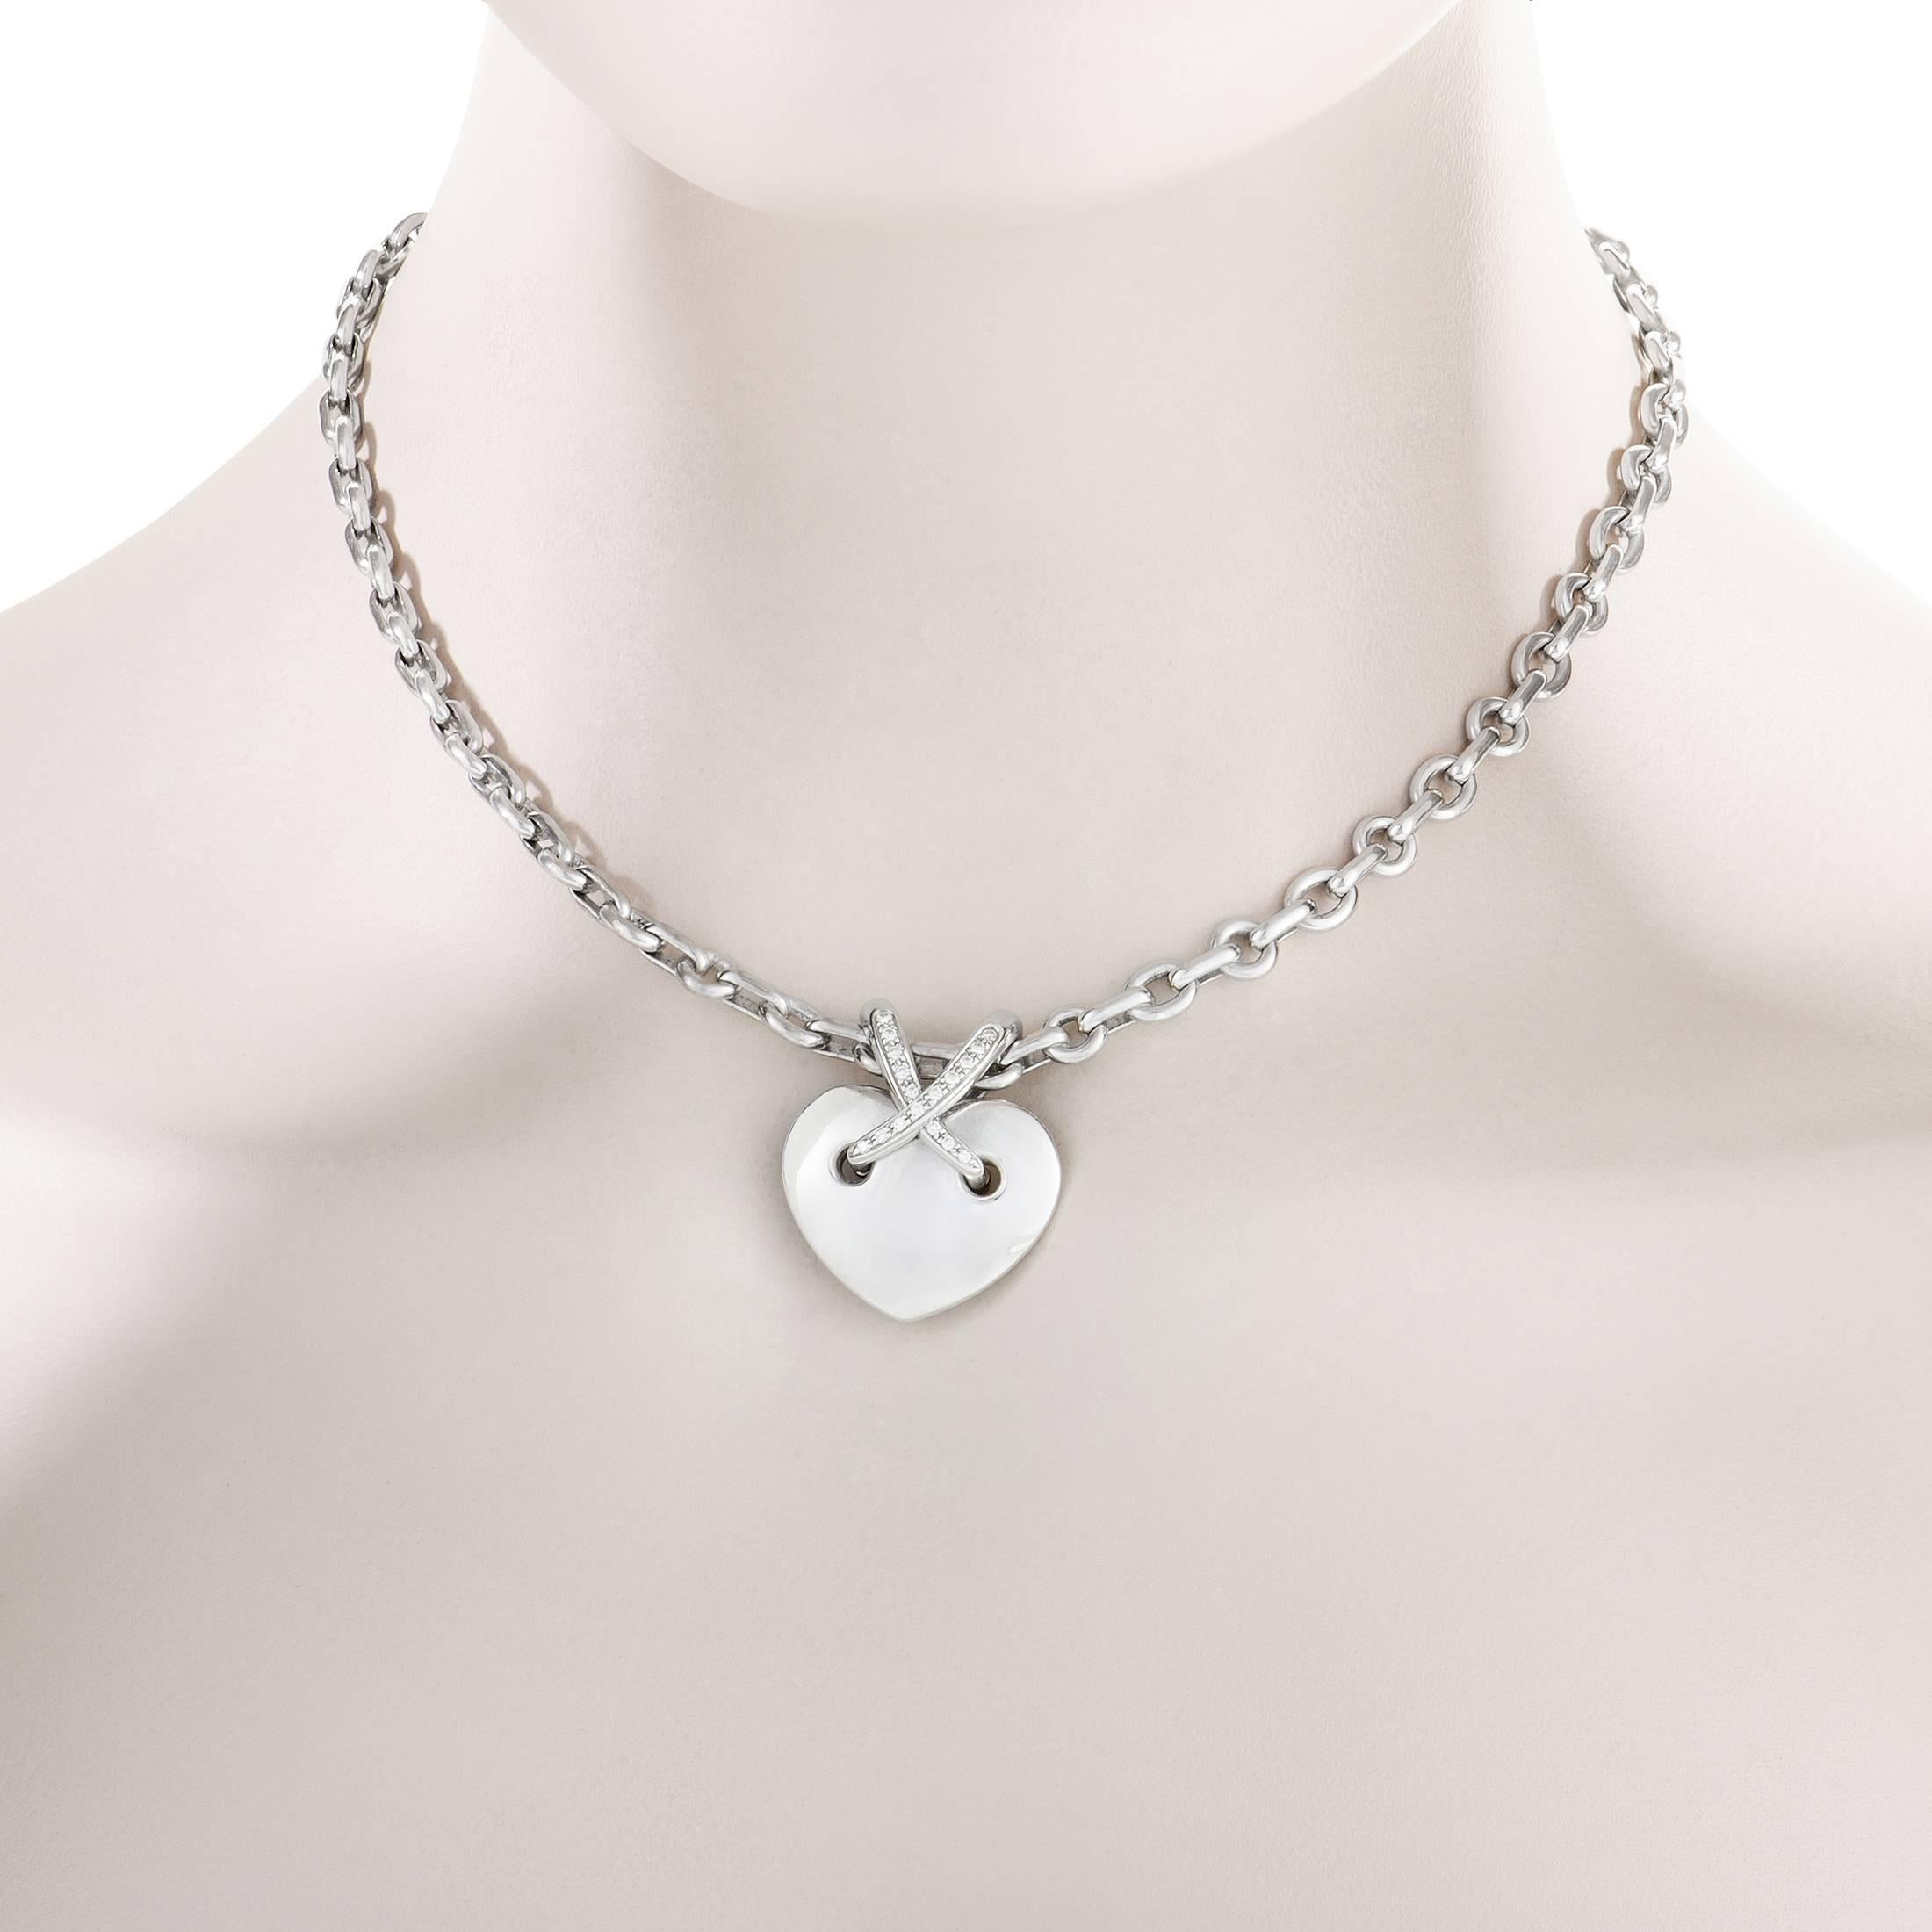 A wonderfully harmonious design that exudes an aura of tasteful subtlety, this charming 18K white gold necklace from Chaumet boasts a neat heart-shaped pendant while set with sparkling diamonds totaling 0.20ct.
Pendant Dimensions: 1.00 x